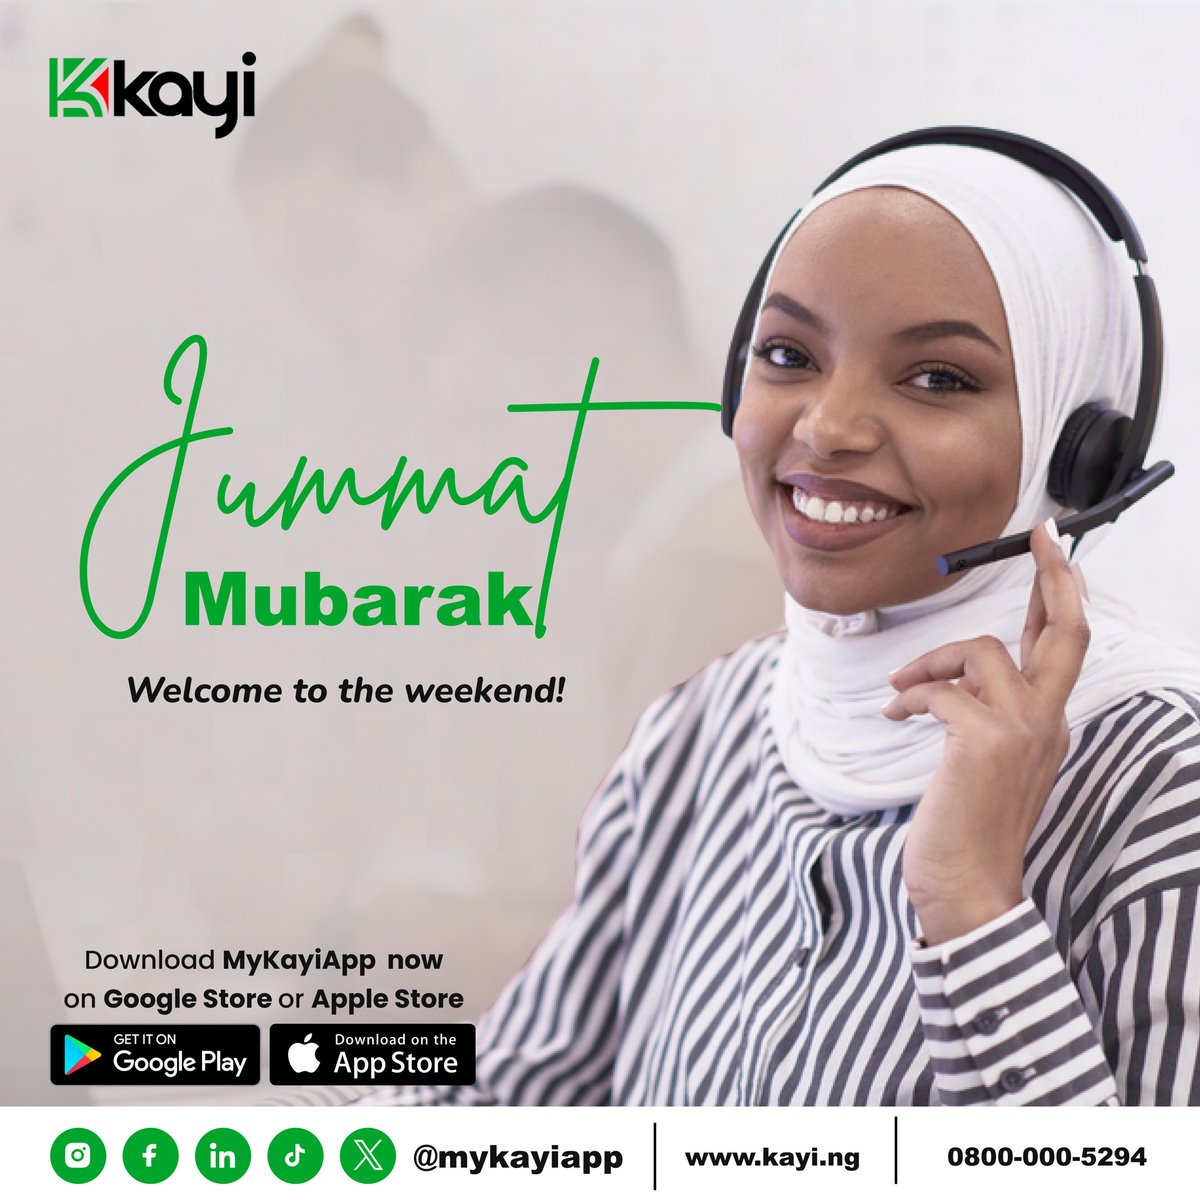 Jummat mubarak Kayifam! Enjoy seamless transactions and financial freedom at your fingertips. Download the Kayiapp on Google play store and Apple app store to kickstart a stress-free weekend!

#MyKayiApp #NowLive #Kayiway #DownloadNow #Bankingwithoutlimits #downloadmykayiapp